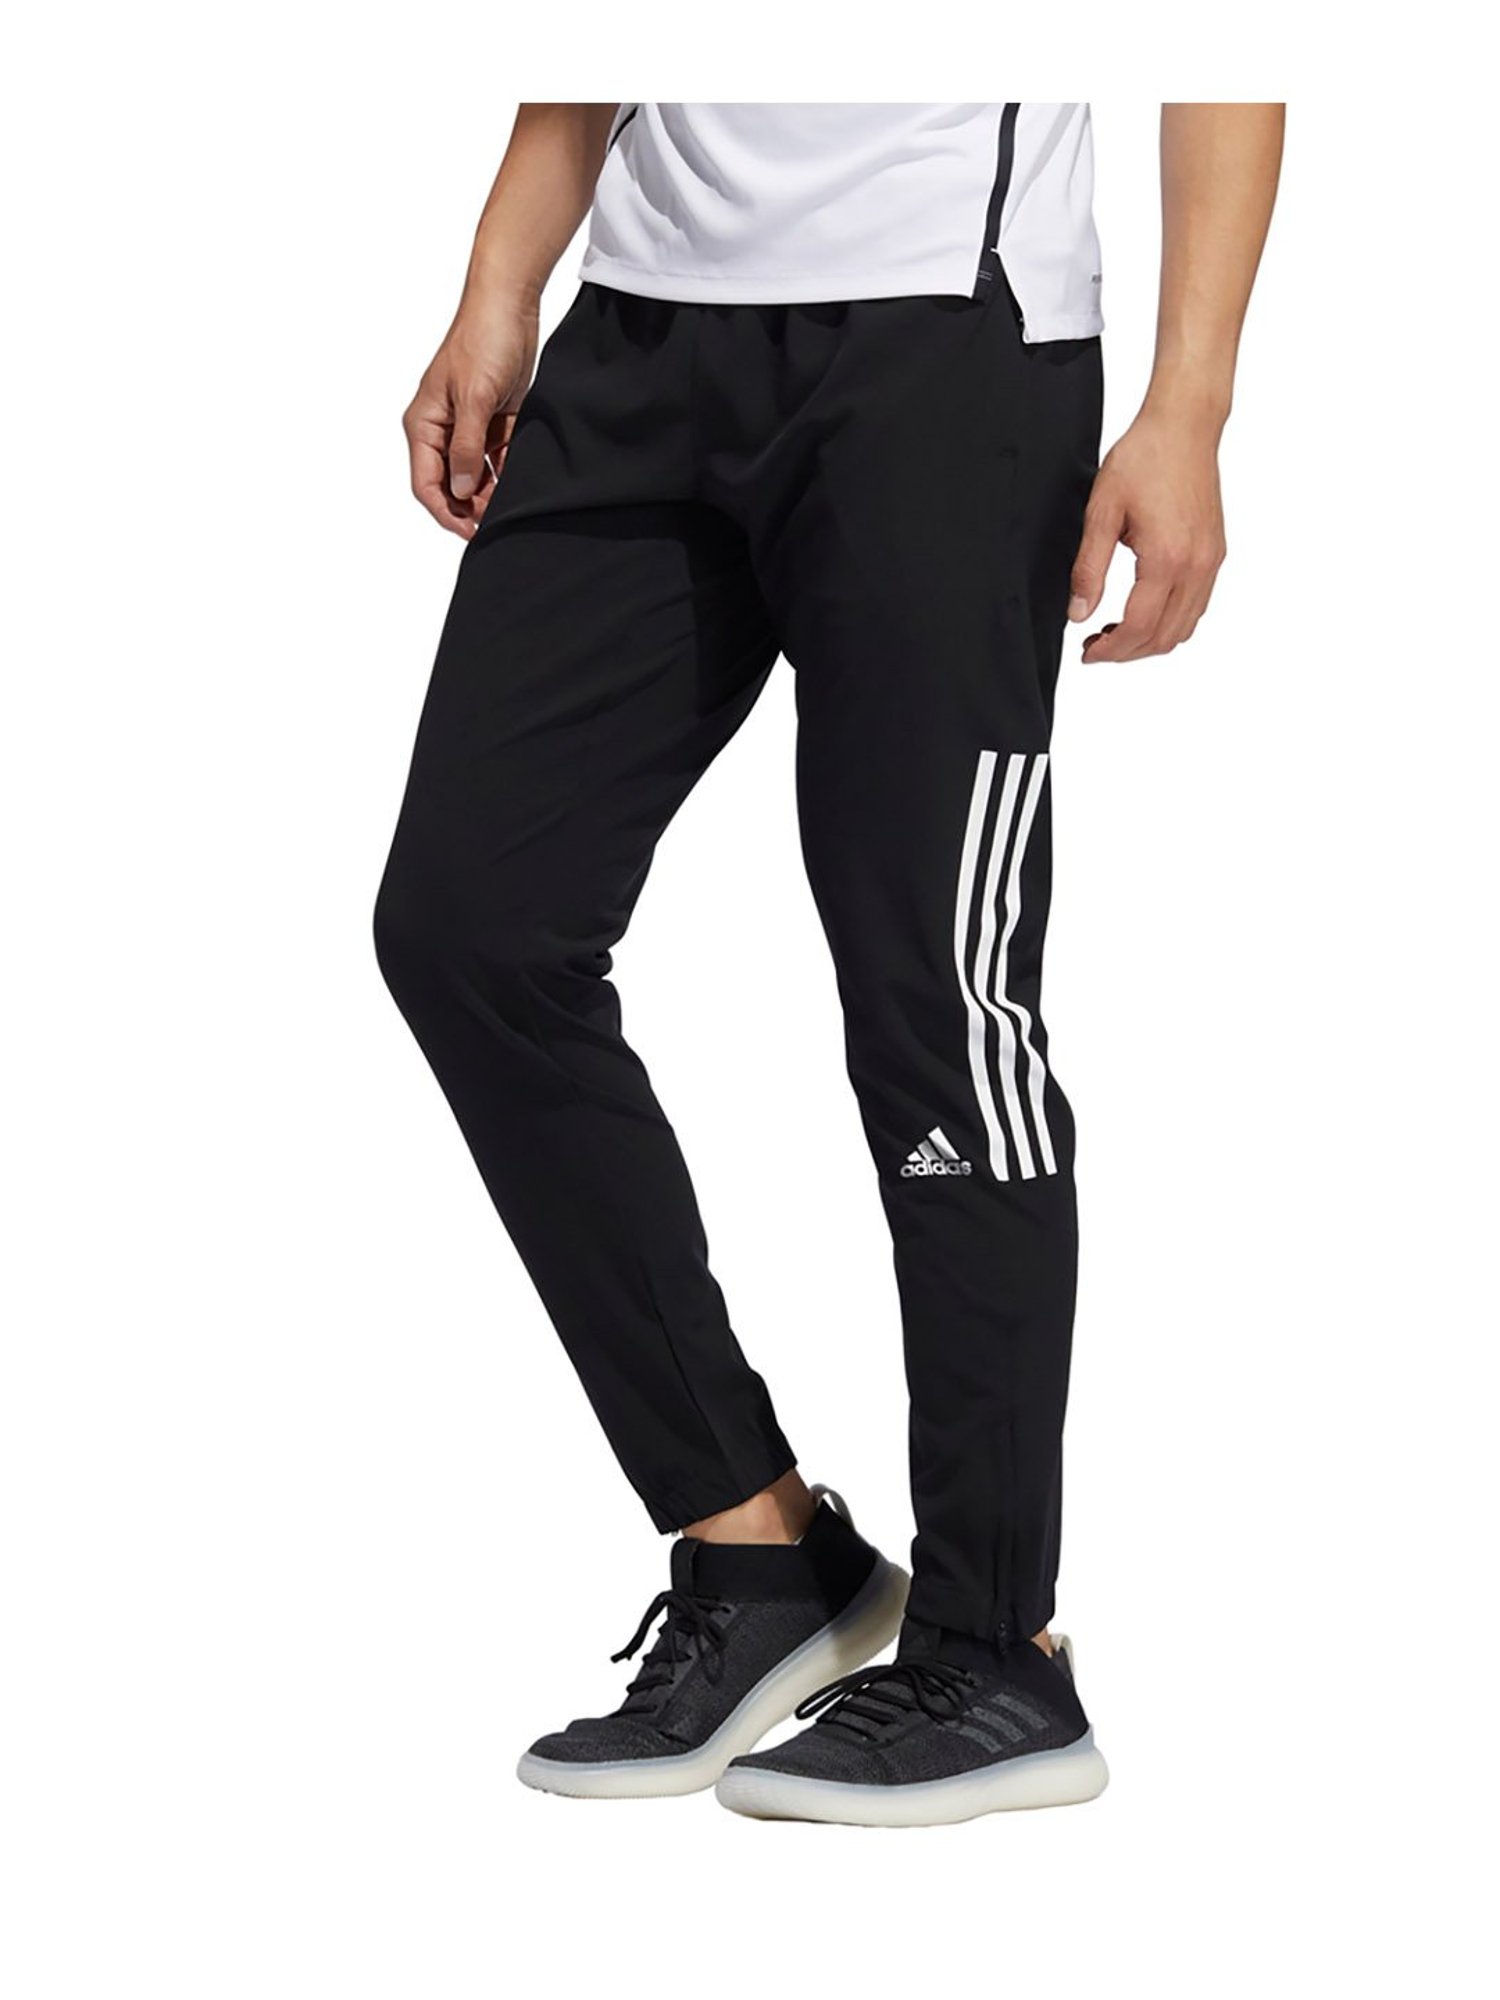 adidas Originals Woven Track Pant Casual Pants  Grey Buy adidas Originals  Woven Track Pant Casual Pants  Grey Online at Best Price in India  Nykaa